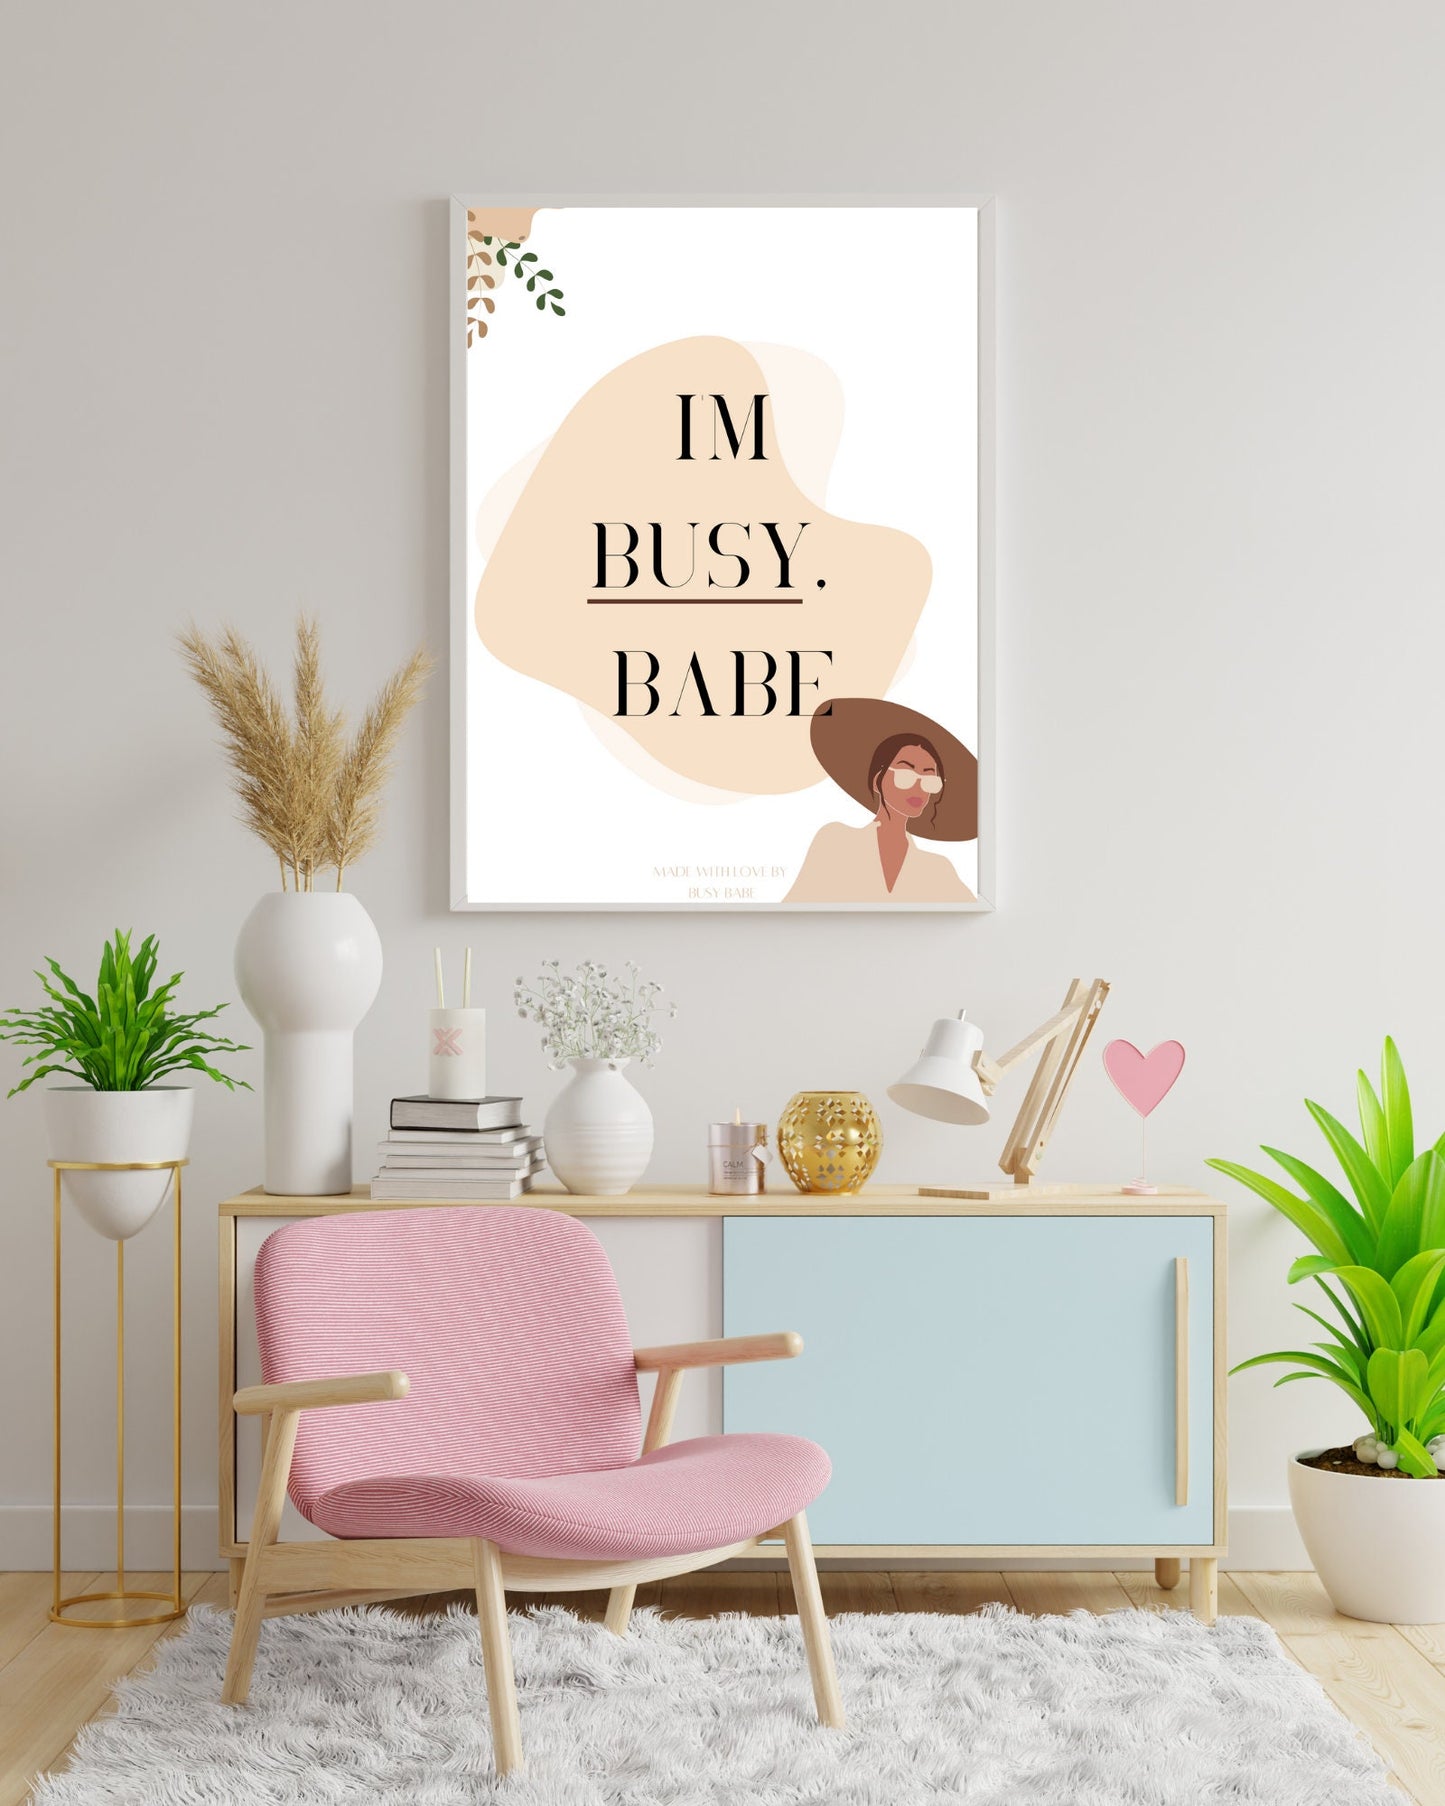 I'm Busy Babe Printable Wall Art Boss Lady Gift Idea Office Wall Decor Feminist Print Neutral Toned Art Boss Babe Digital Prints for Her